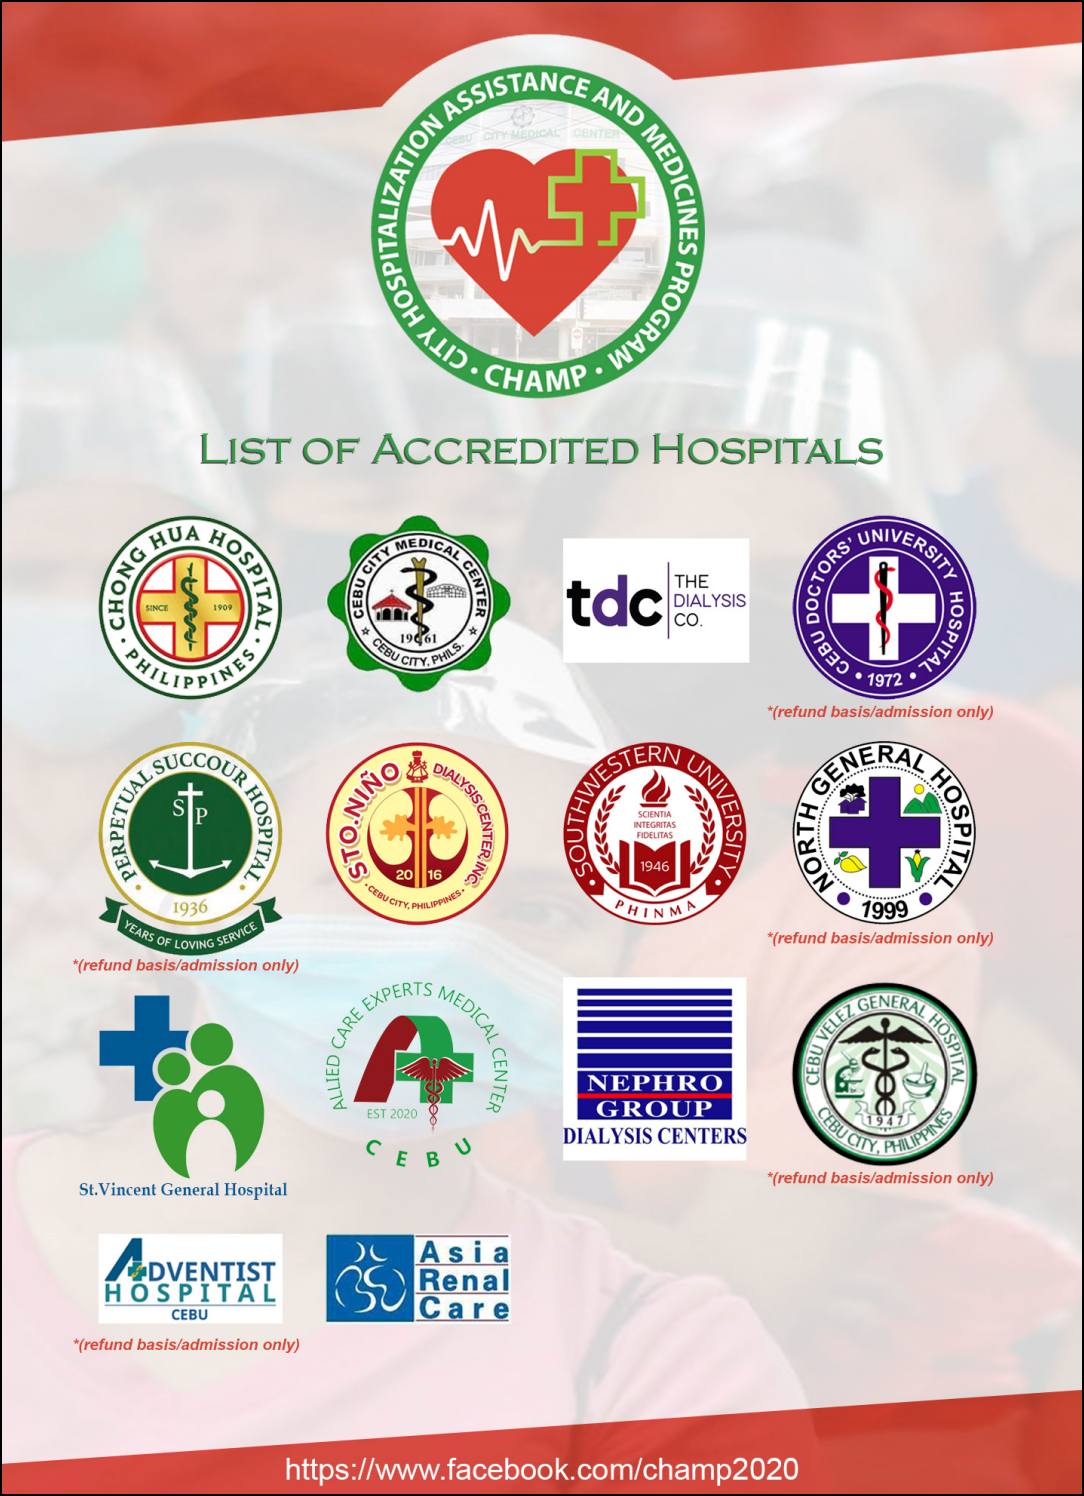 LIST OF ACCREDITED HOSPITAL